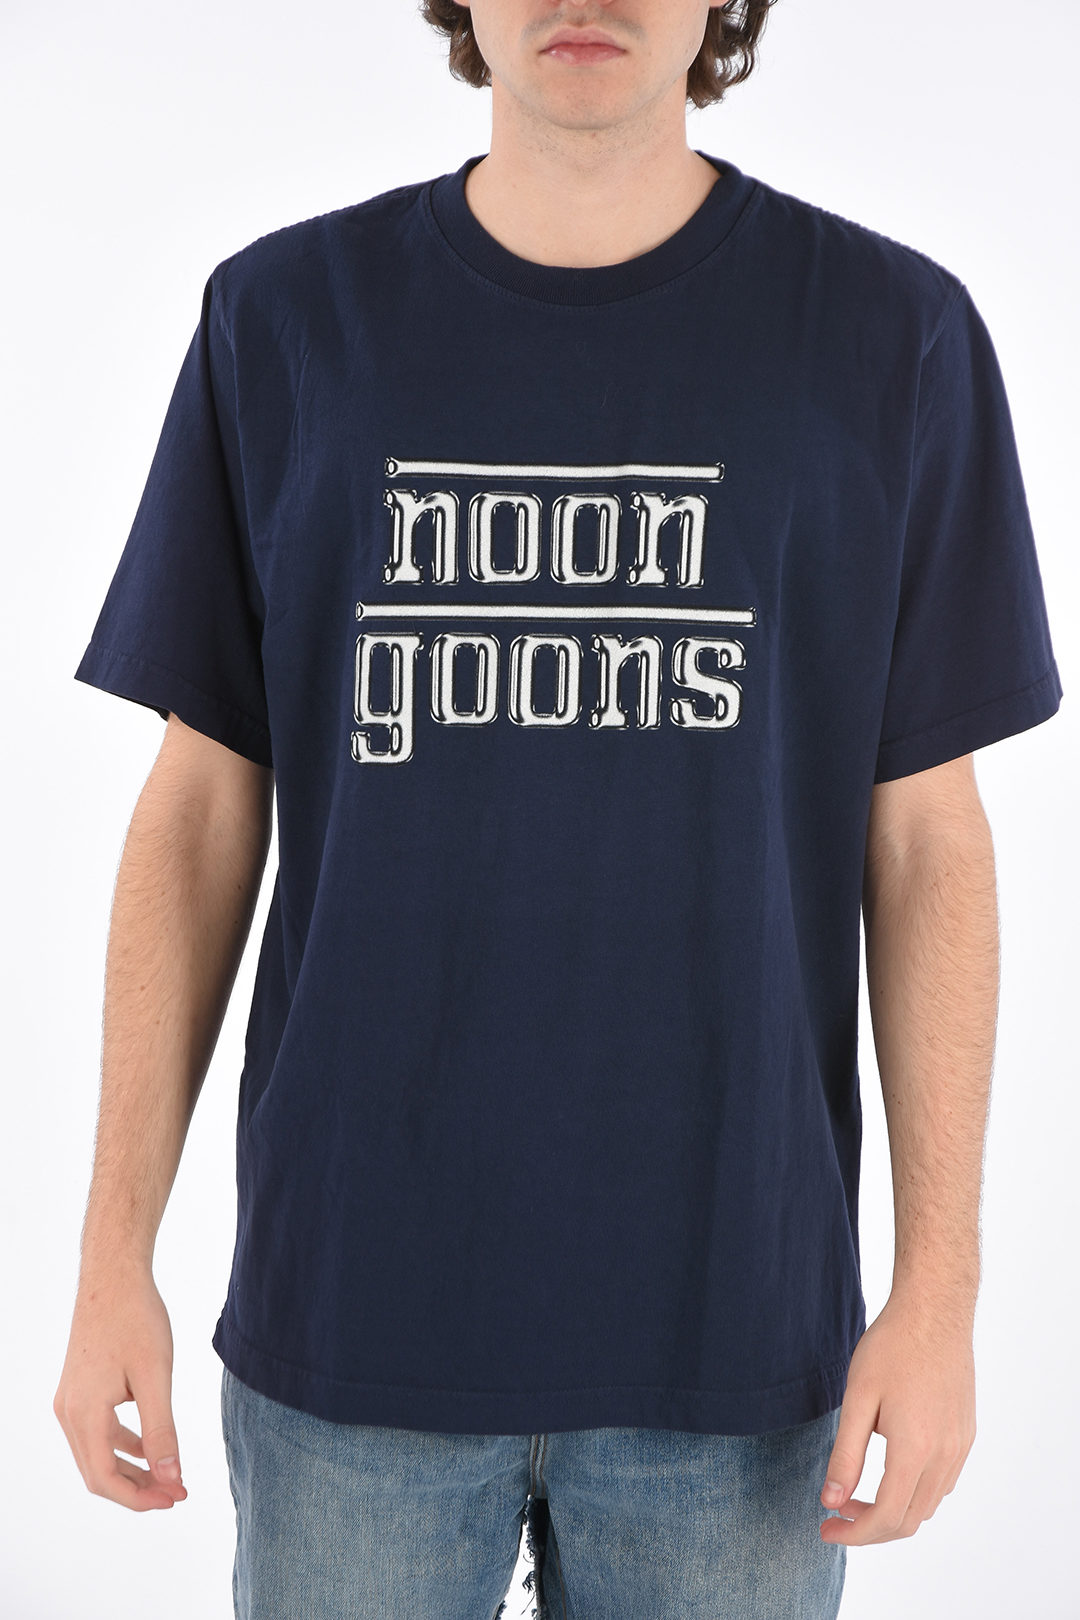 Noon Goons printed crew-neck t-shirt men - Glamood Outlet